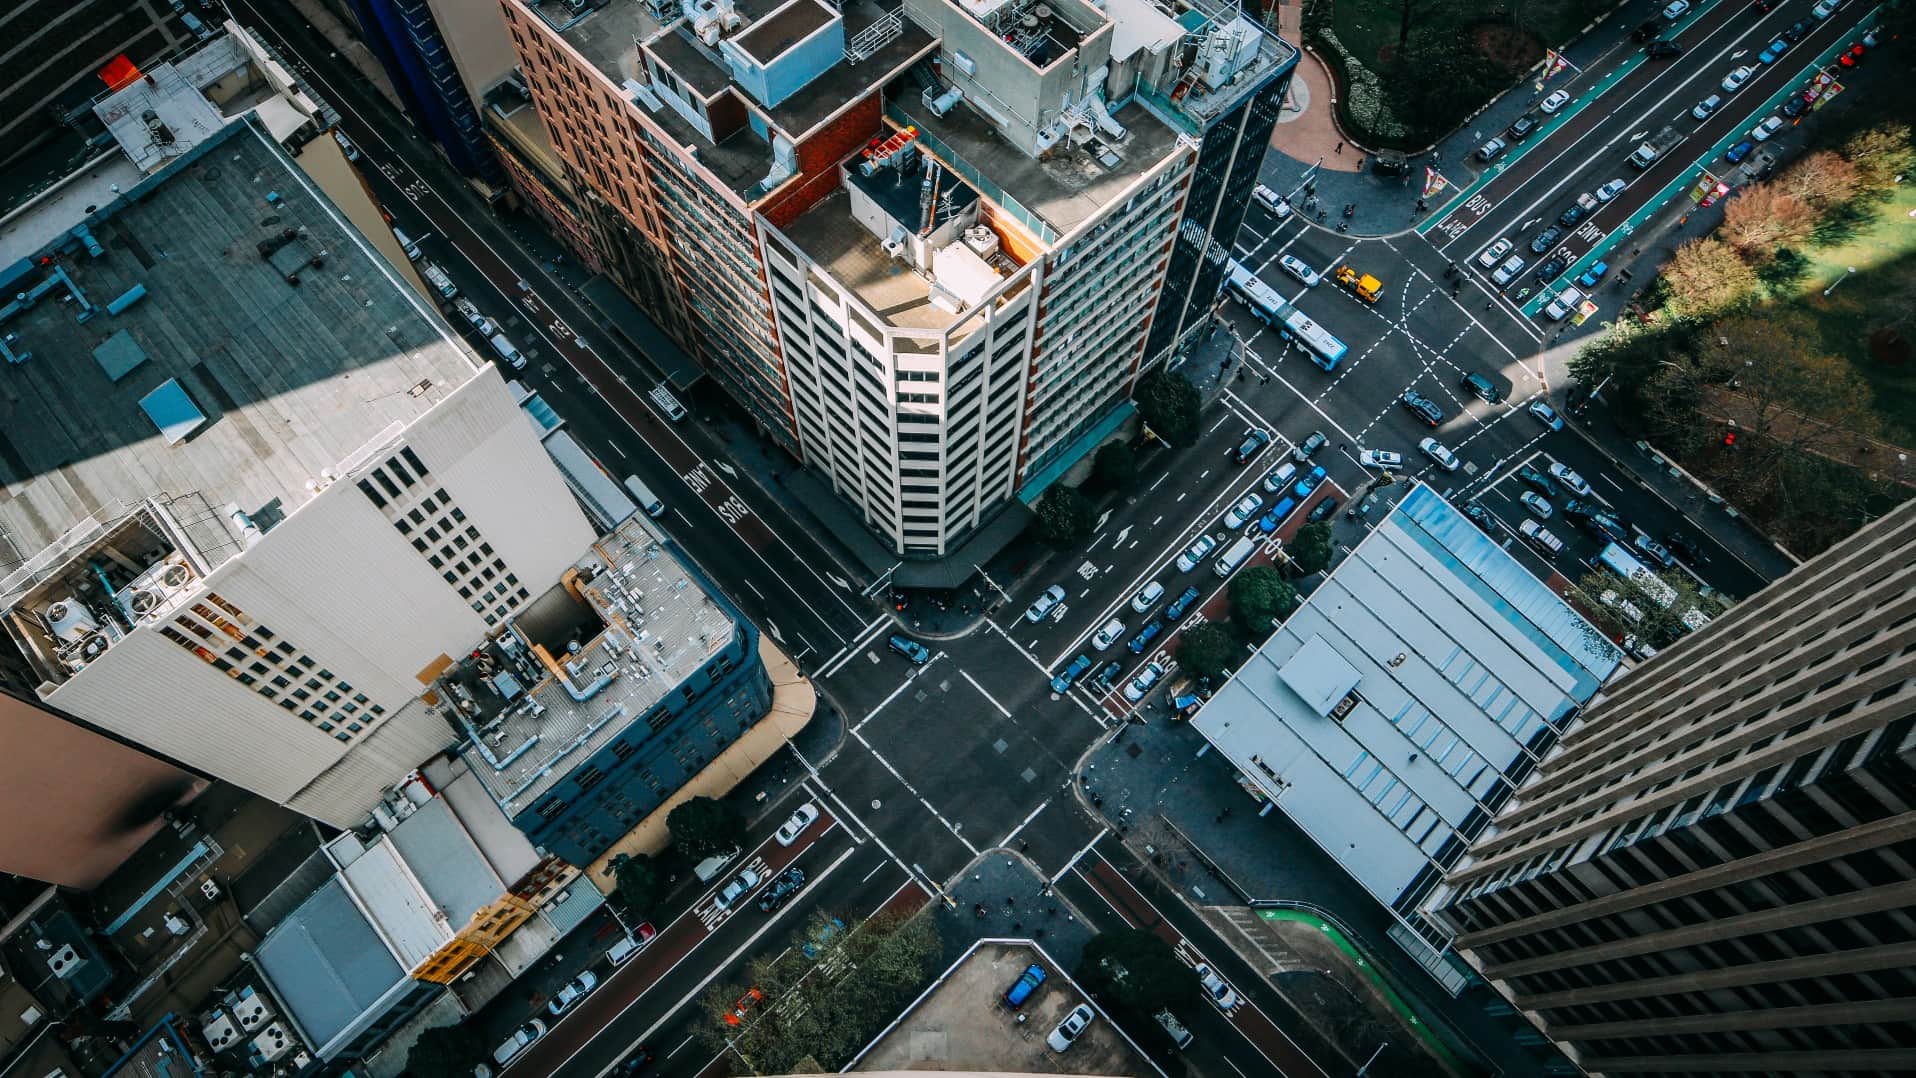 An aerial view of Sydney city, looking down on high-rise rooftops and intersections. Photo: Unsplash/Alexander Pidgeon